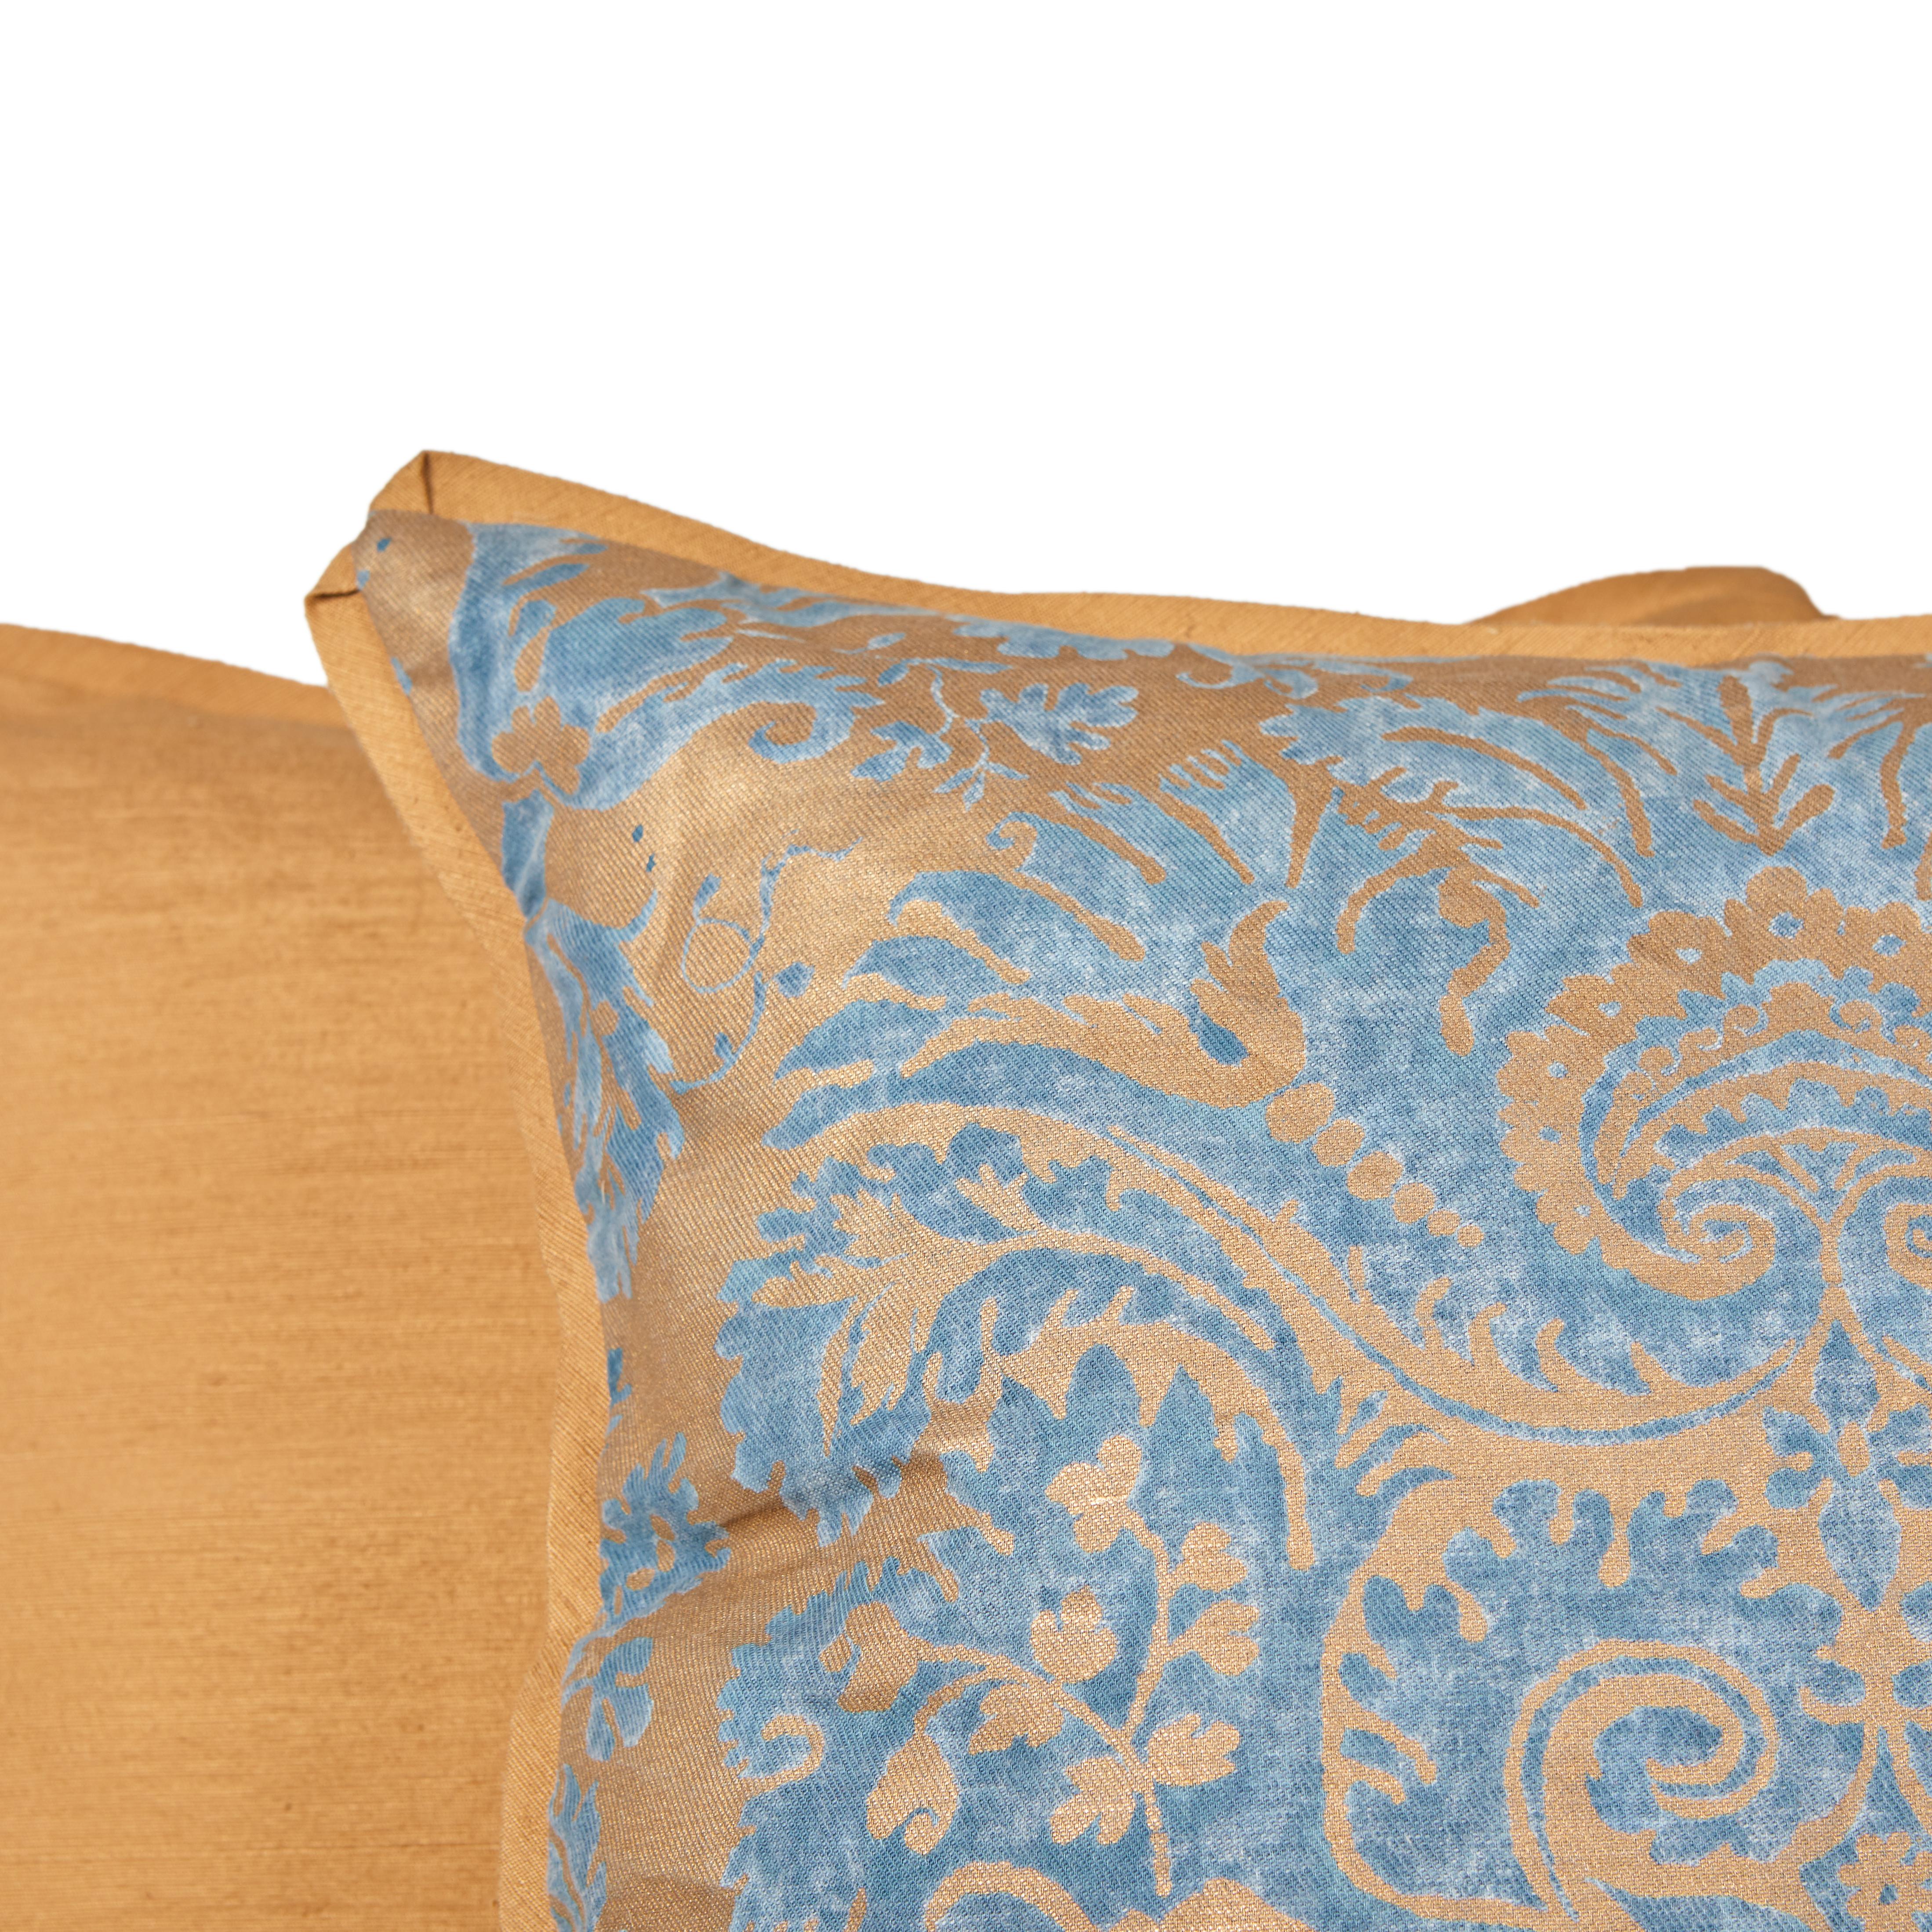 Contemporary Pair of Fortuny Fabric Cushions in the Demedici Pattern, Blue and Silvery Gold For Sale